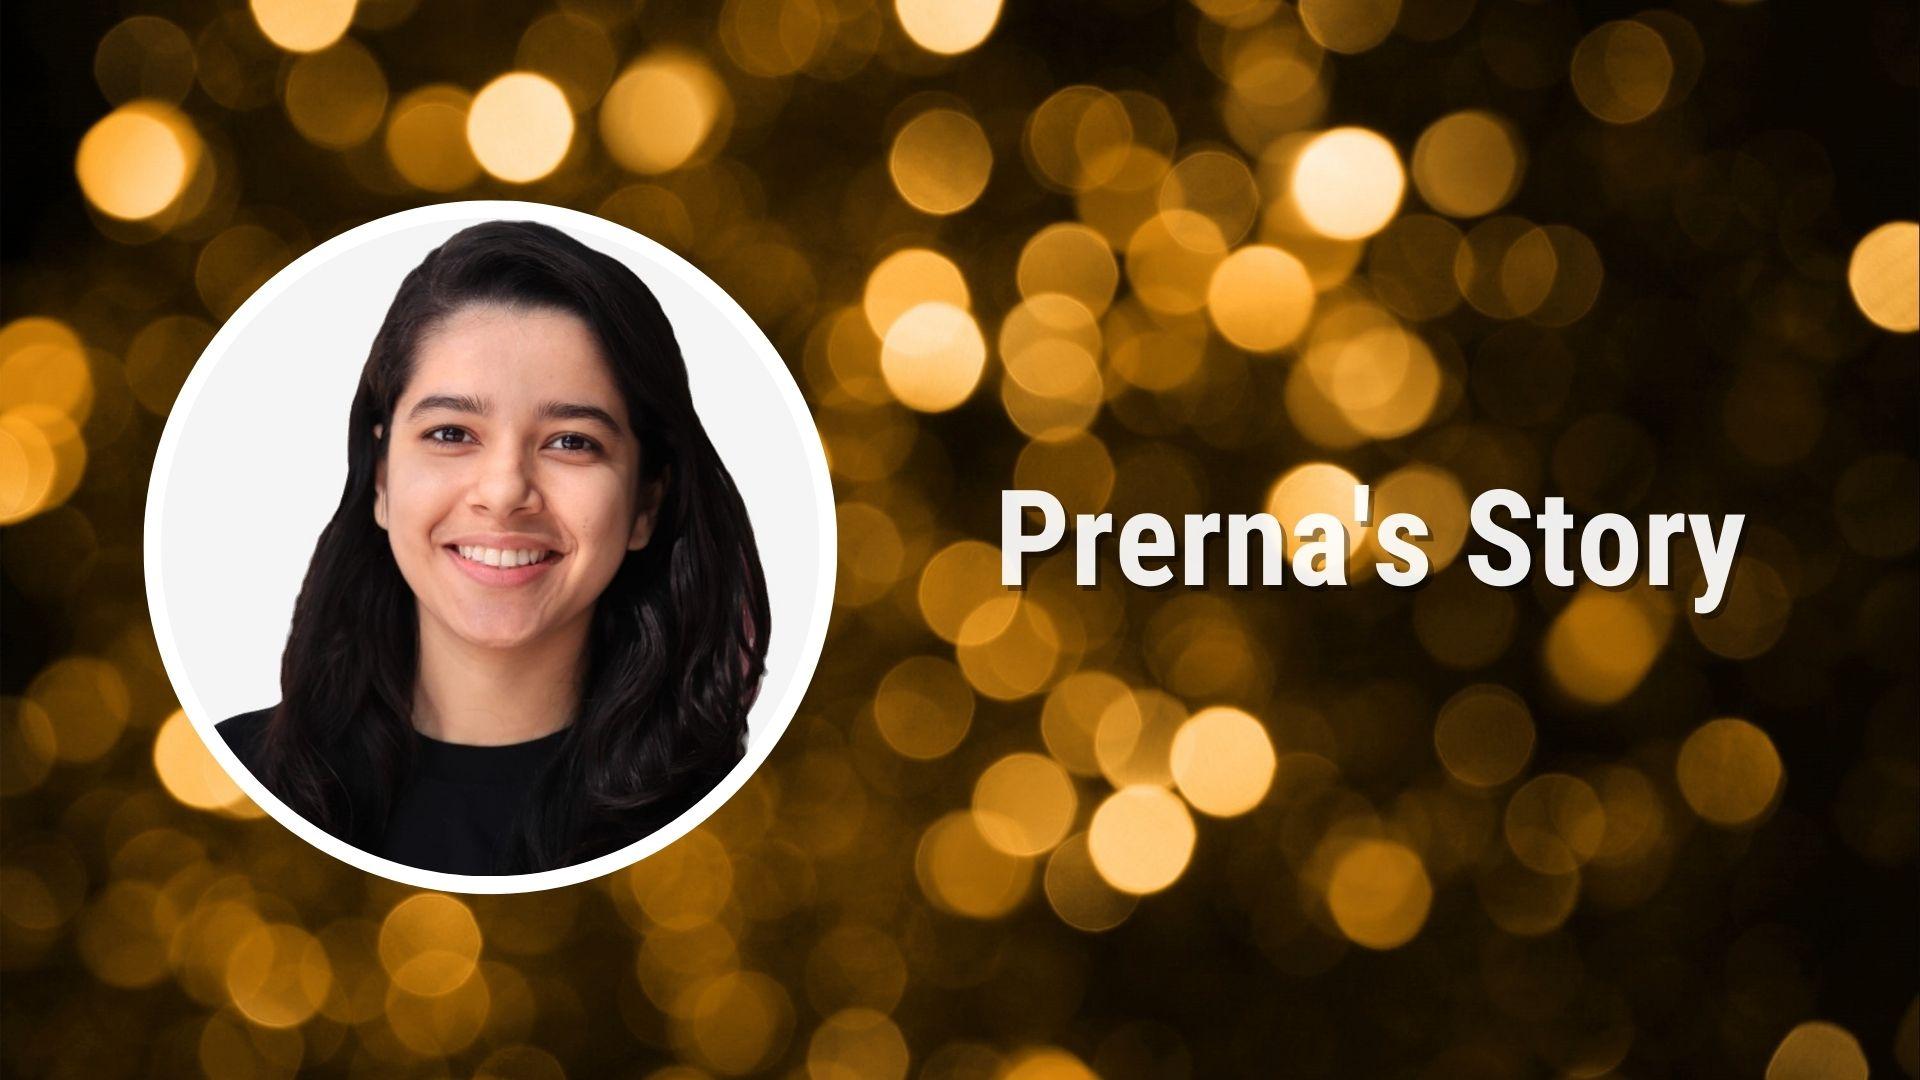 Working at Sparkle - Story Prerna